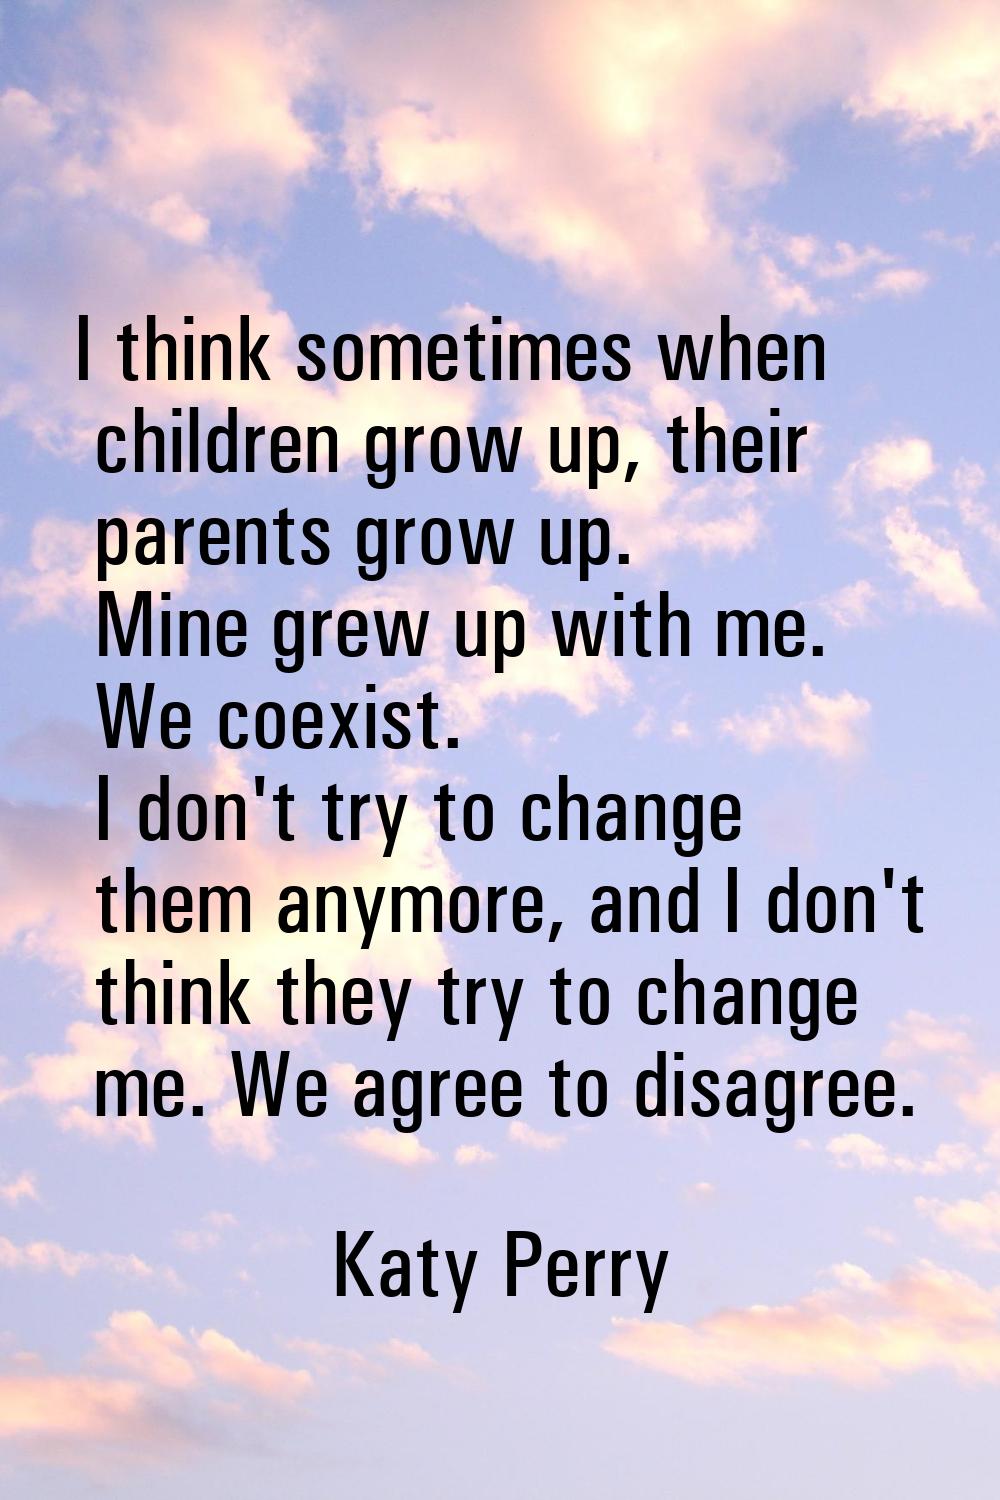 I think sometimes when children grow up, their parents grow up. Mine grew up with me. We coexist. I